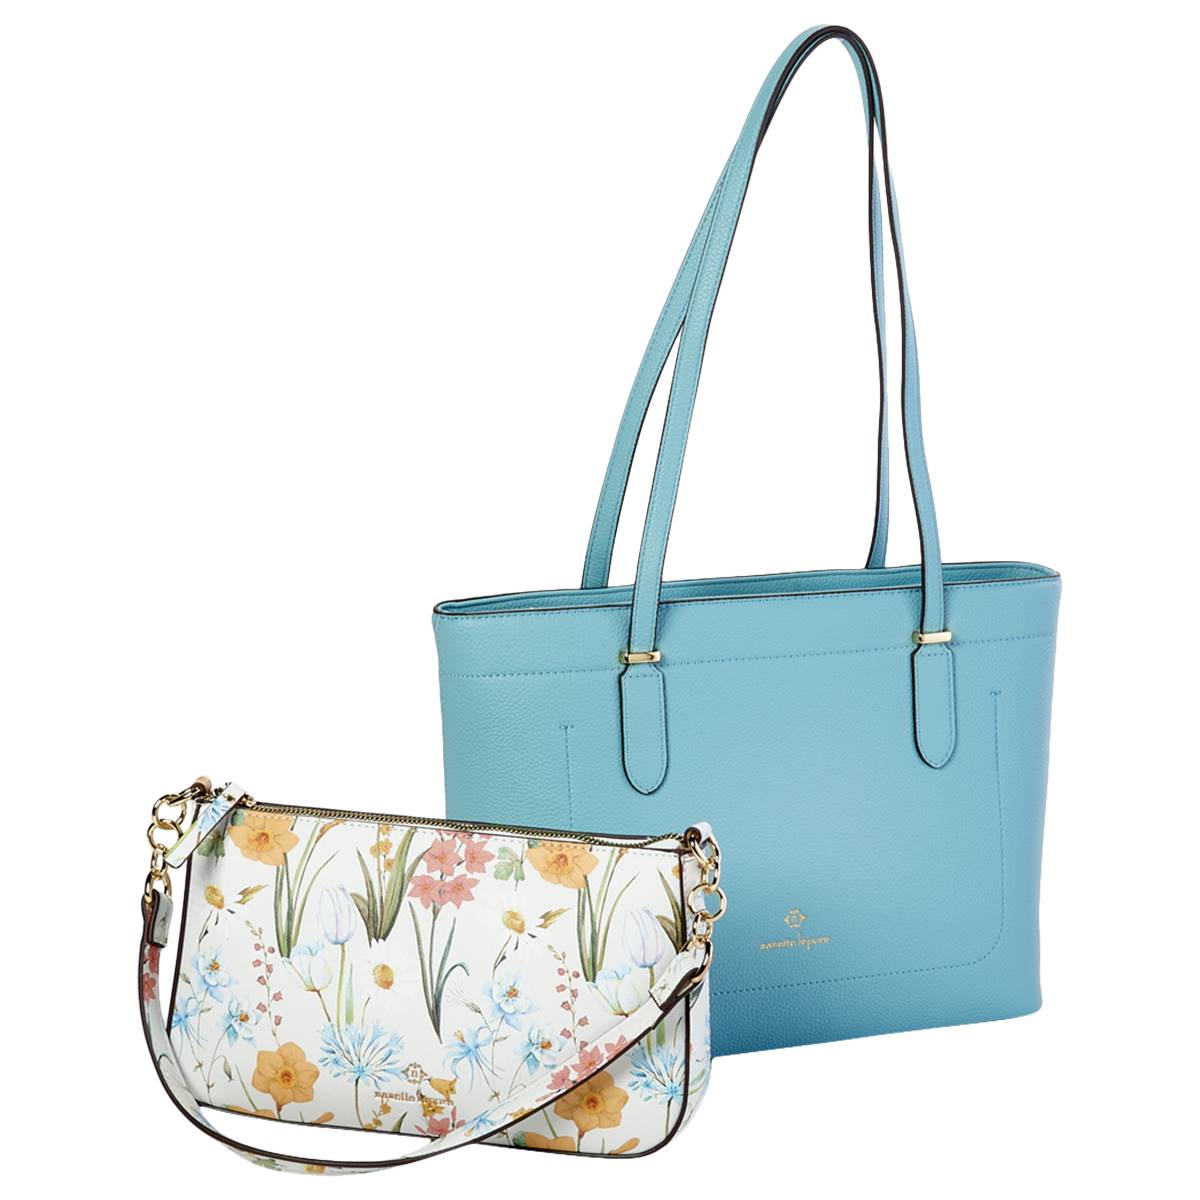 Nanette Lepore Anderson Solid Tote With Floral Bag In A Bag